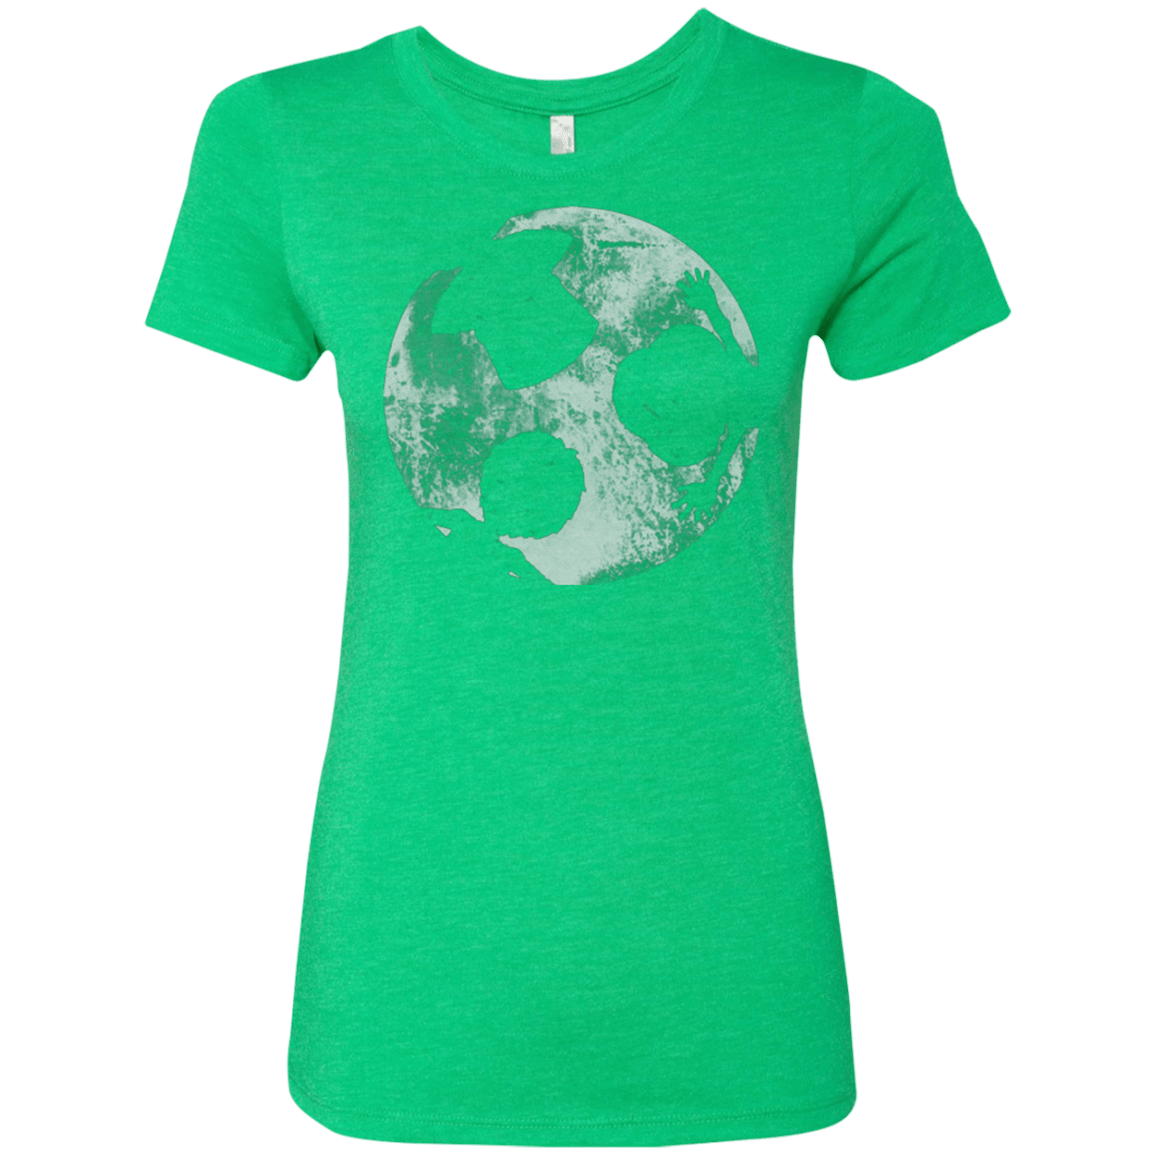 T-Shirts Envy / Small Brothers Moon Women's Triblend T-Shirt